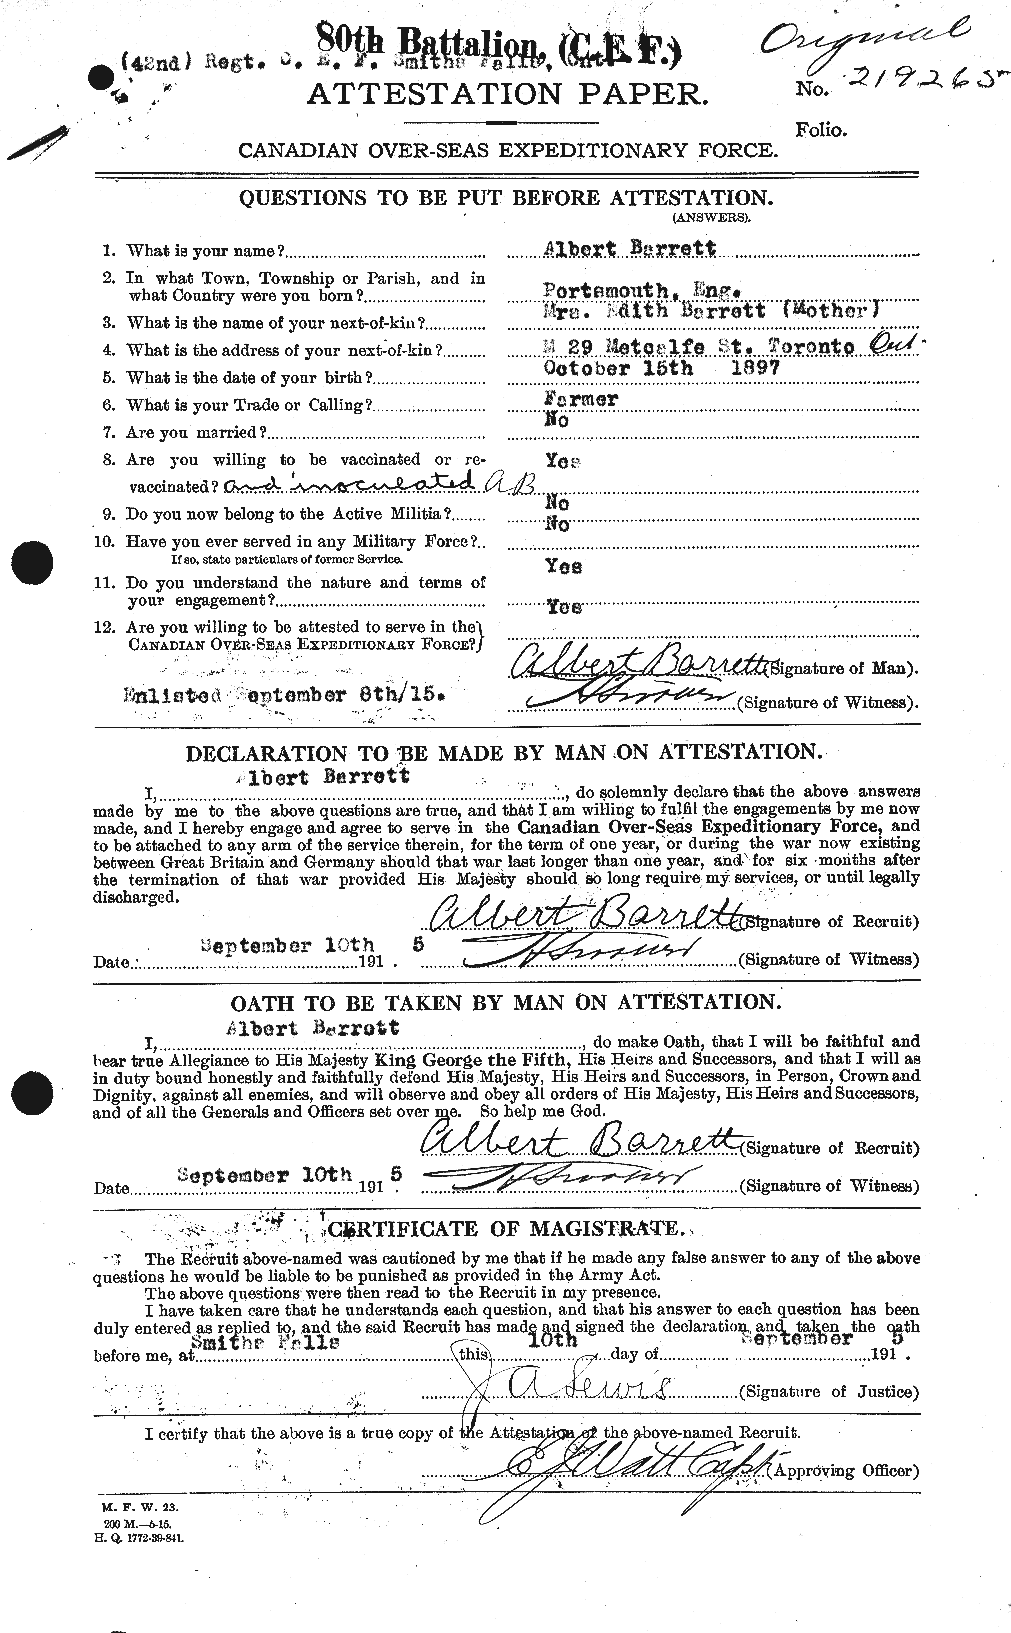 Personnel Records of the First World War - CEF 222209a